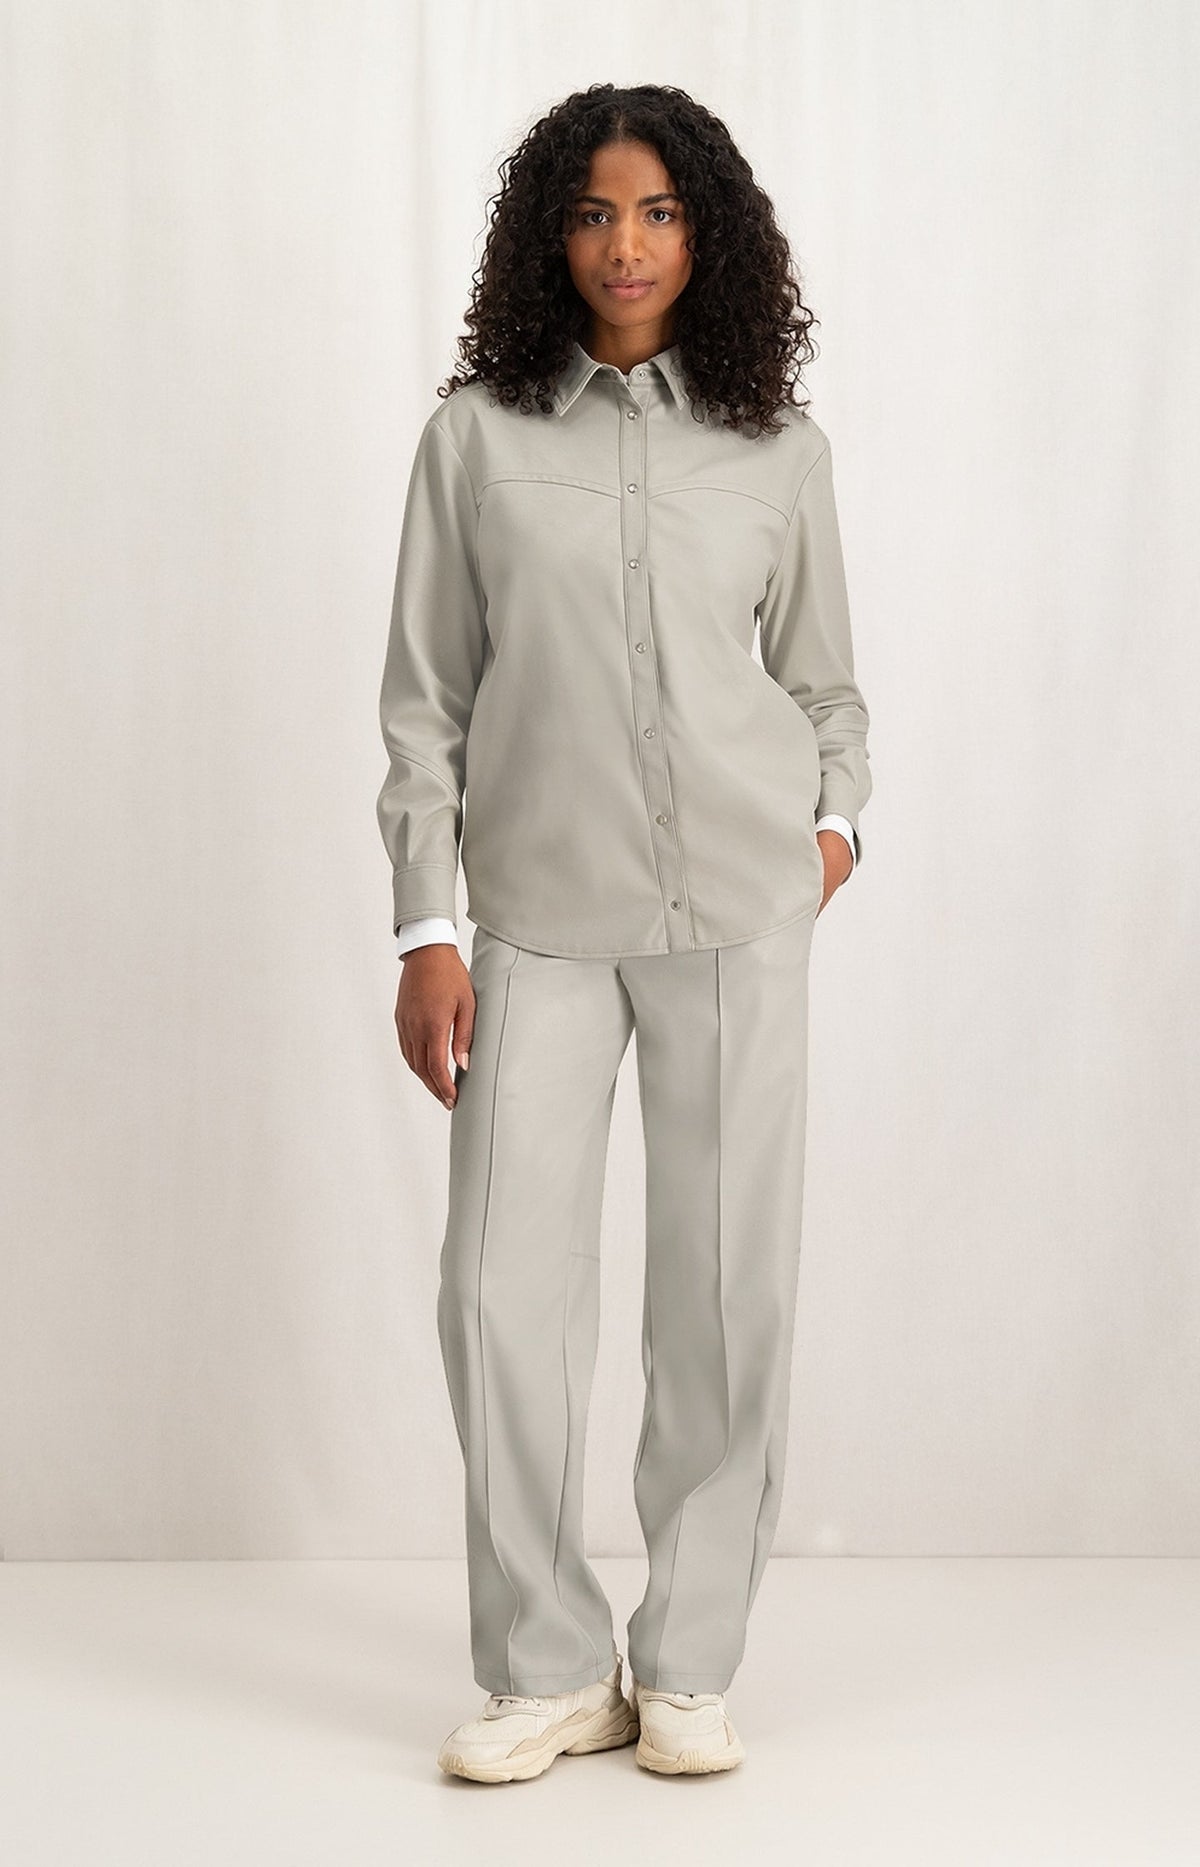 YaYa | Faux Leather Blouse | Long Sleeves | Silver Lining Beige